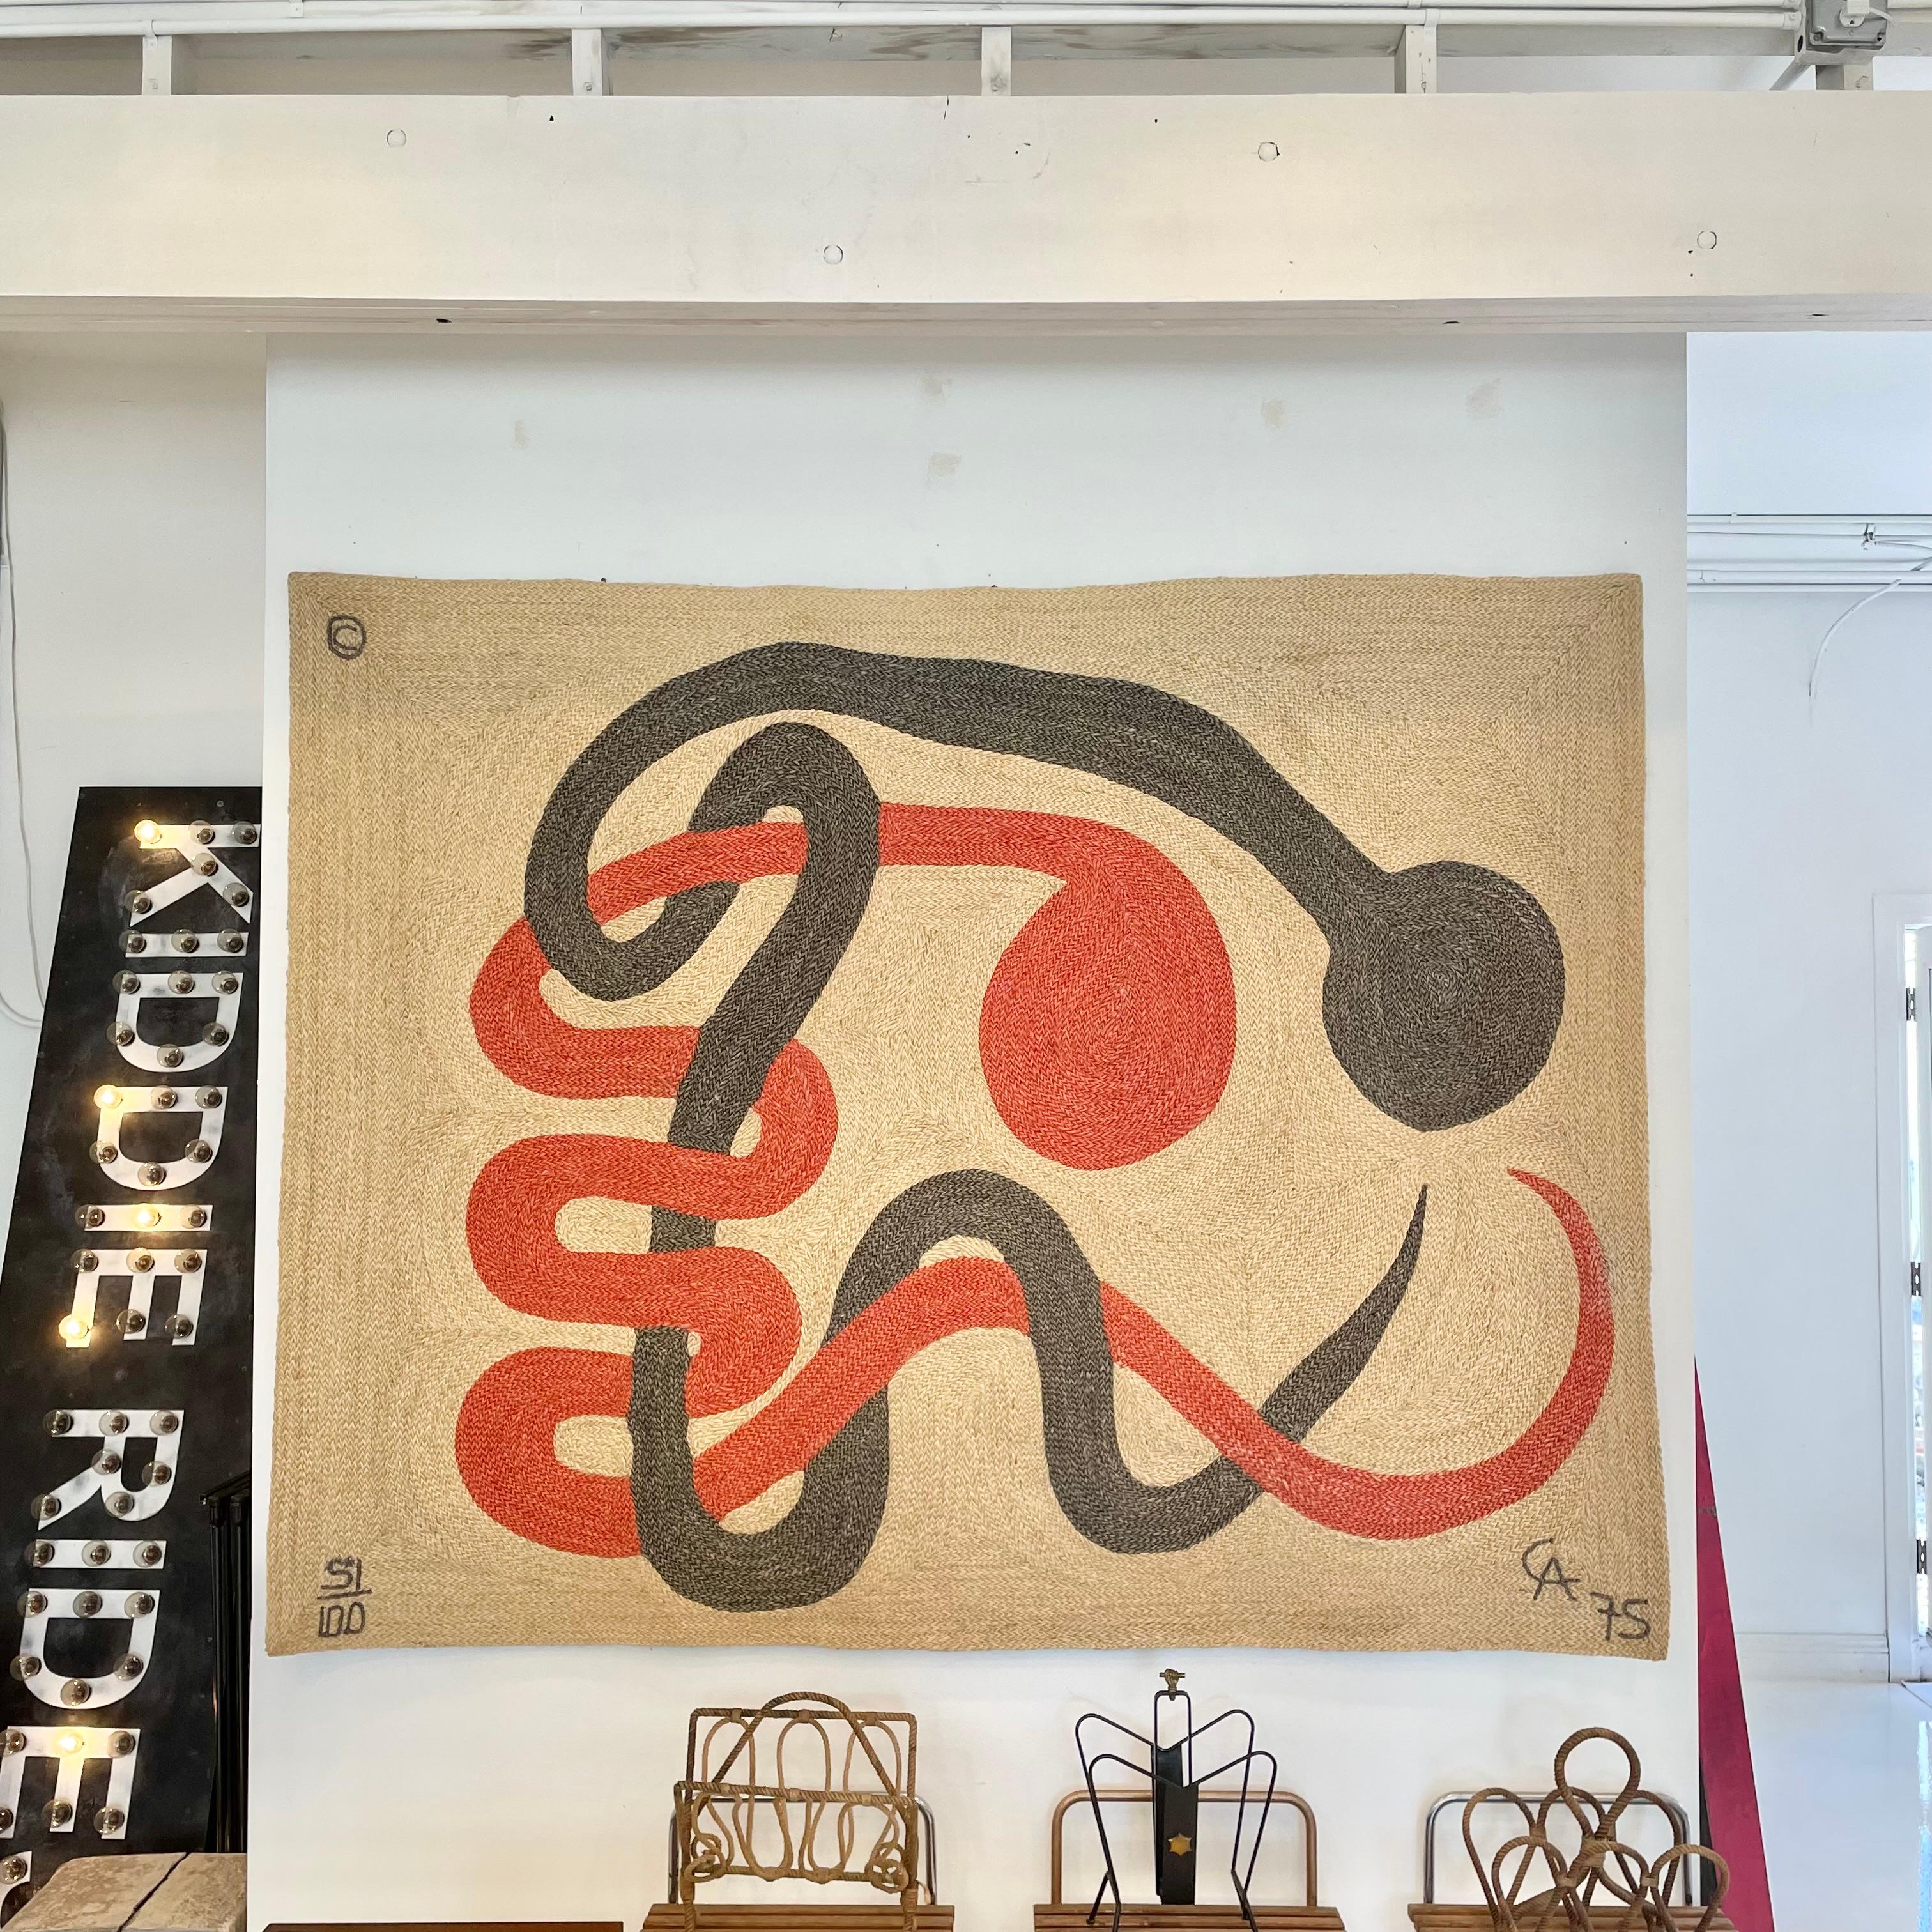 Extremely rare Alexander Calder jute tapestry. Made in Guatemala in 1975. Calder drew 14 designs for a rug or tapestry and a limited edition of each was made by weavers in Guatemala from local fibers. There was an earthquake in 1972, in Nicaragua